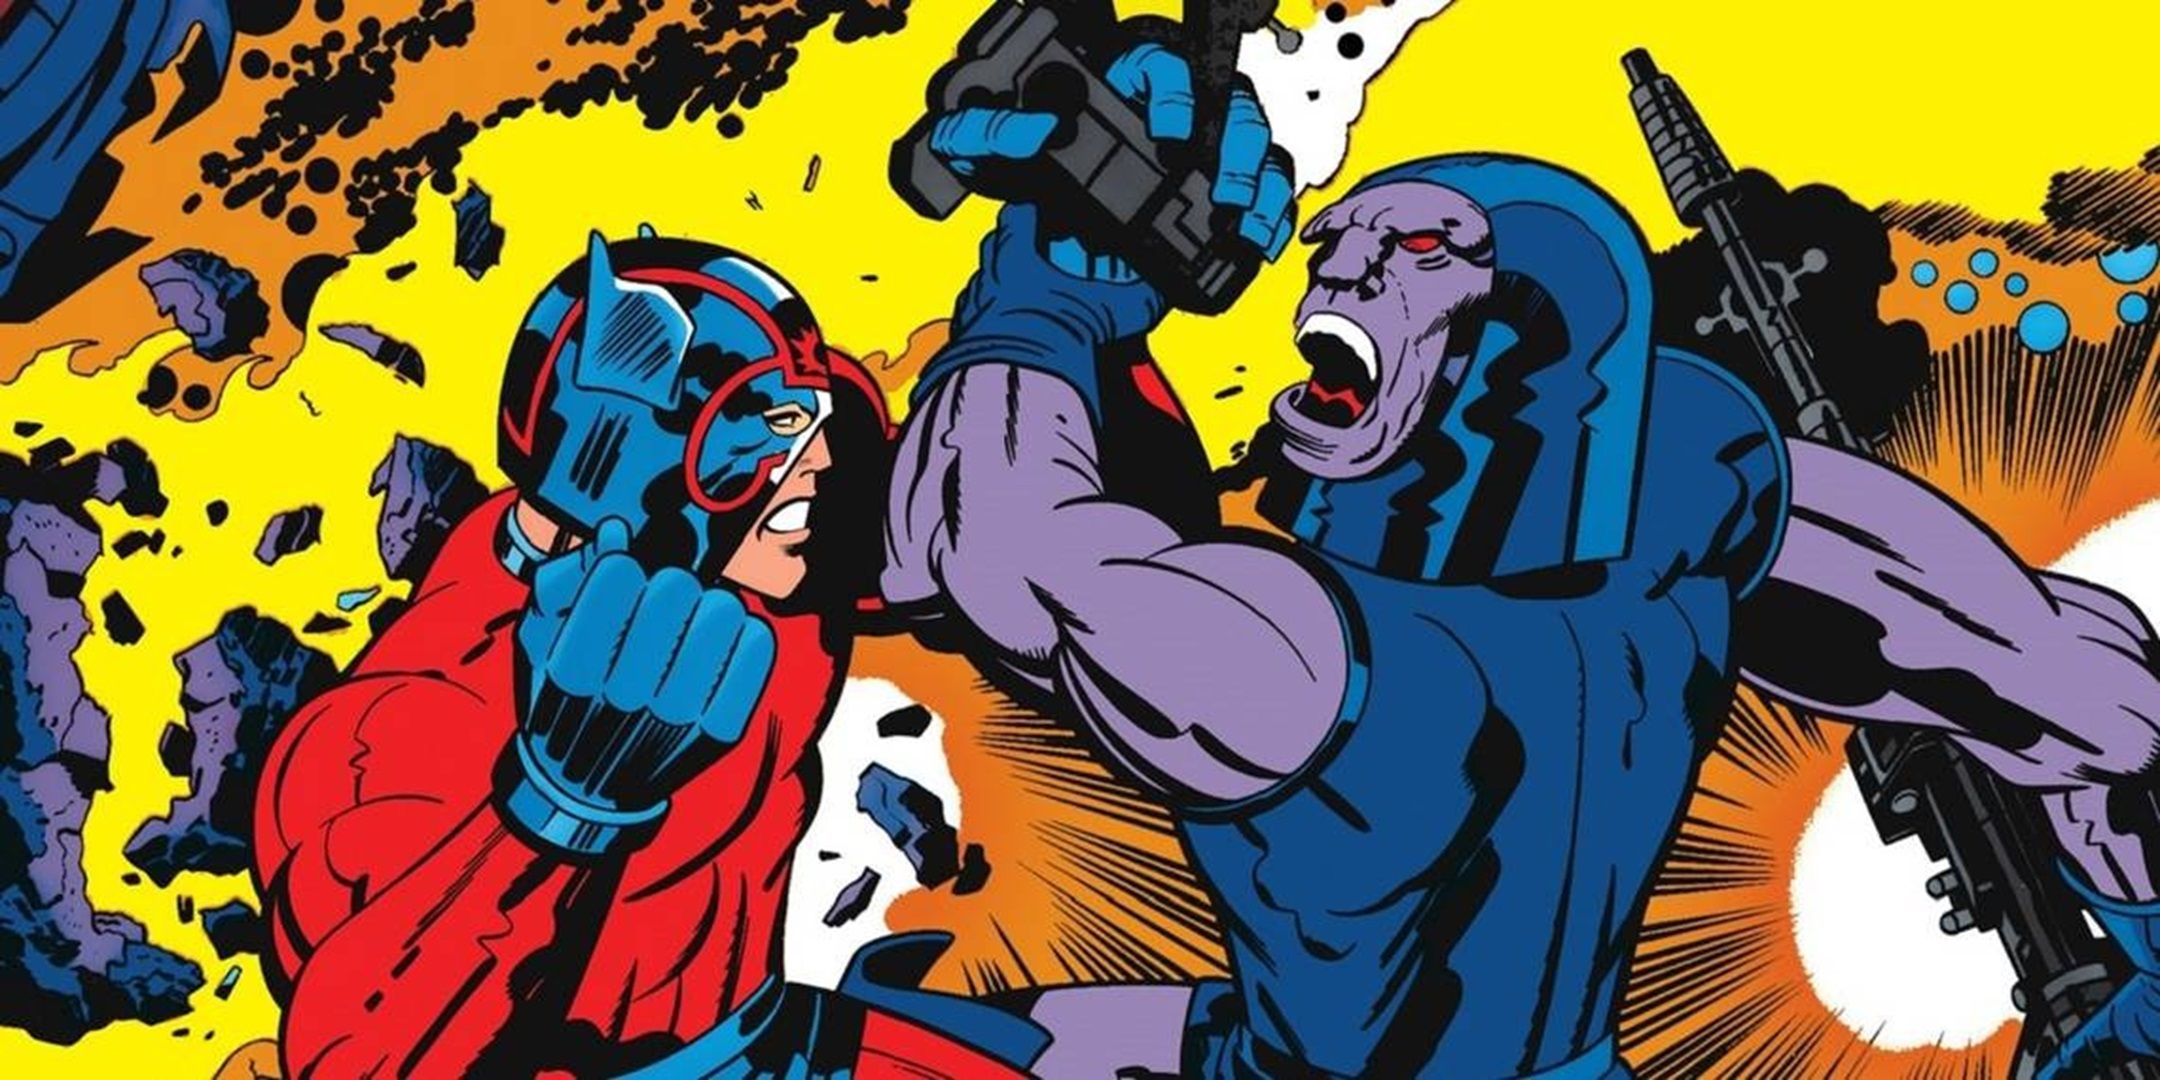 Does Jack Kirby's 'Fourth World' Have an Official Definition?